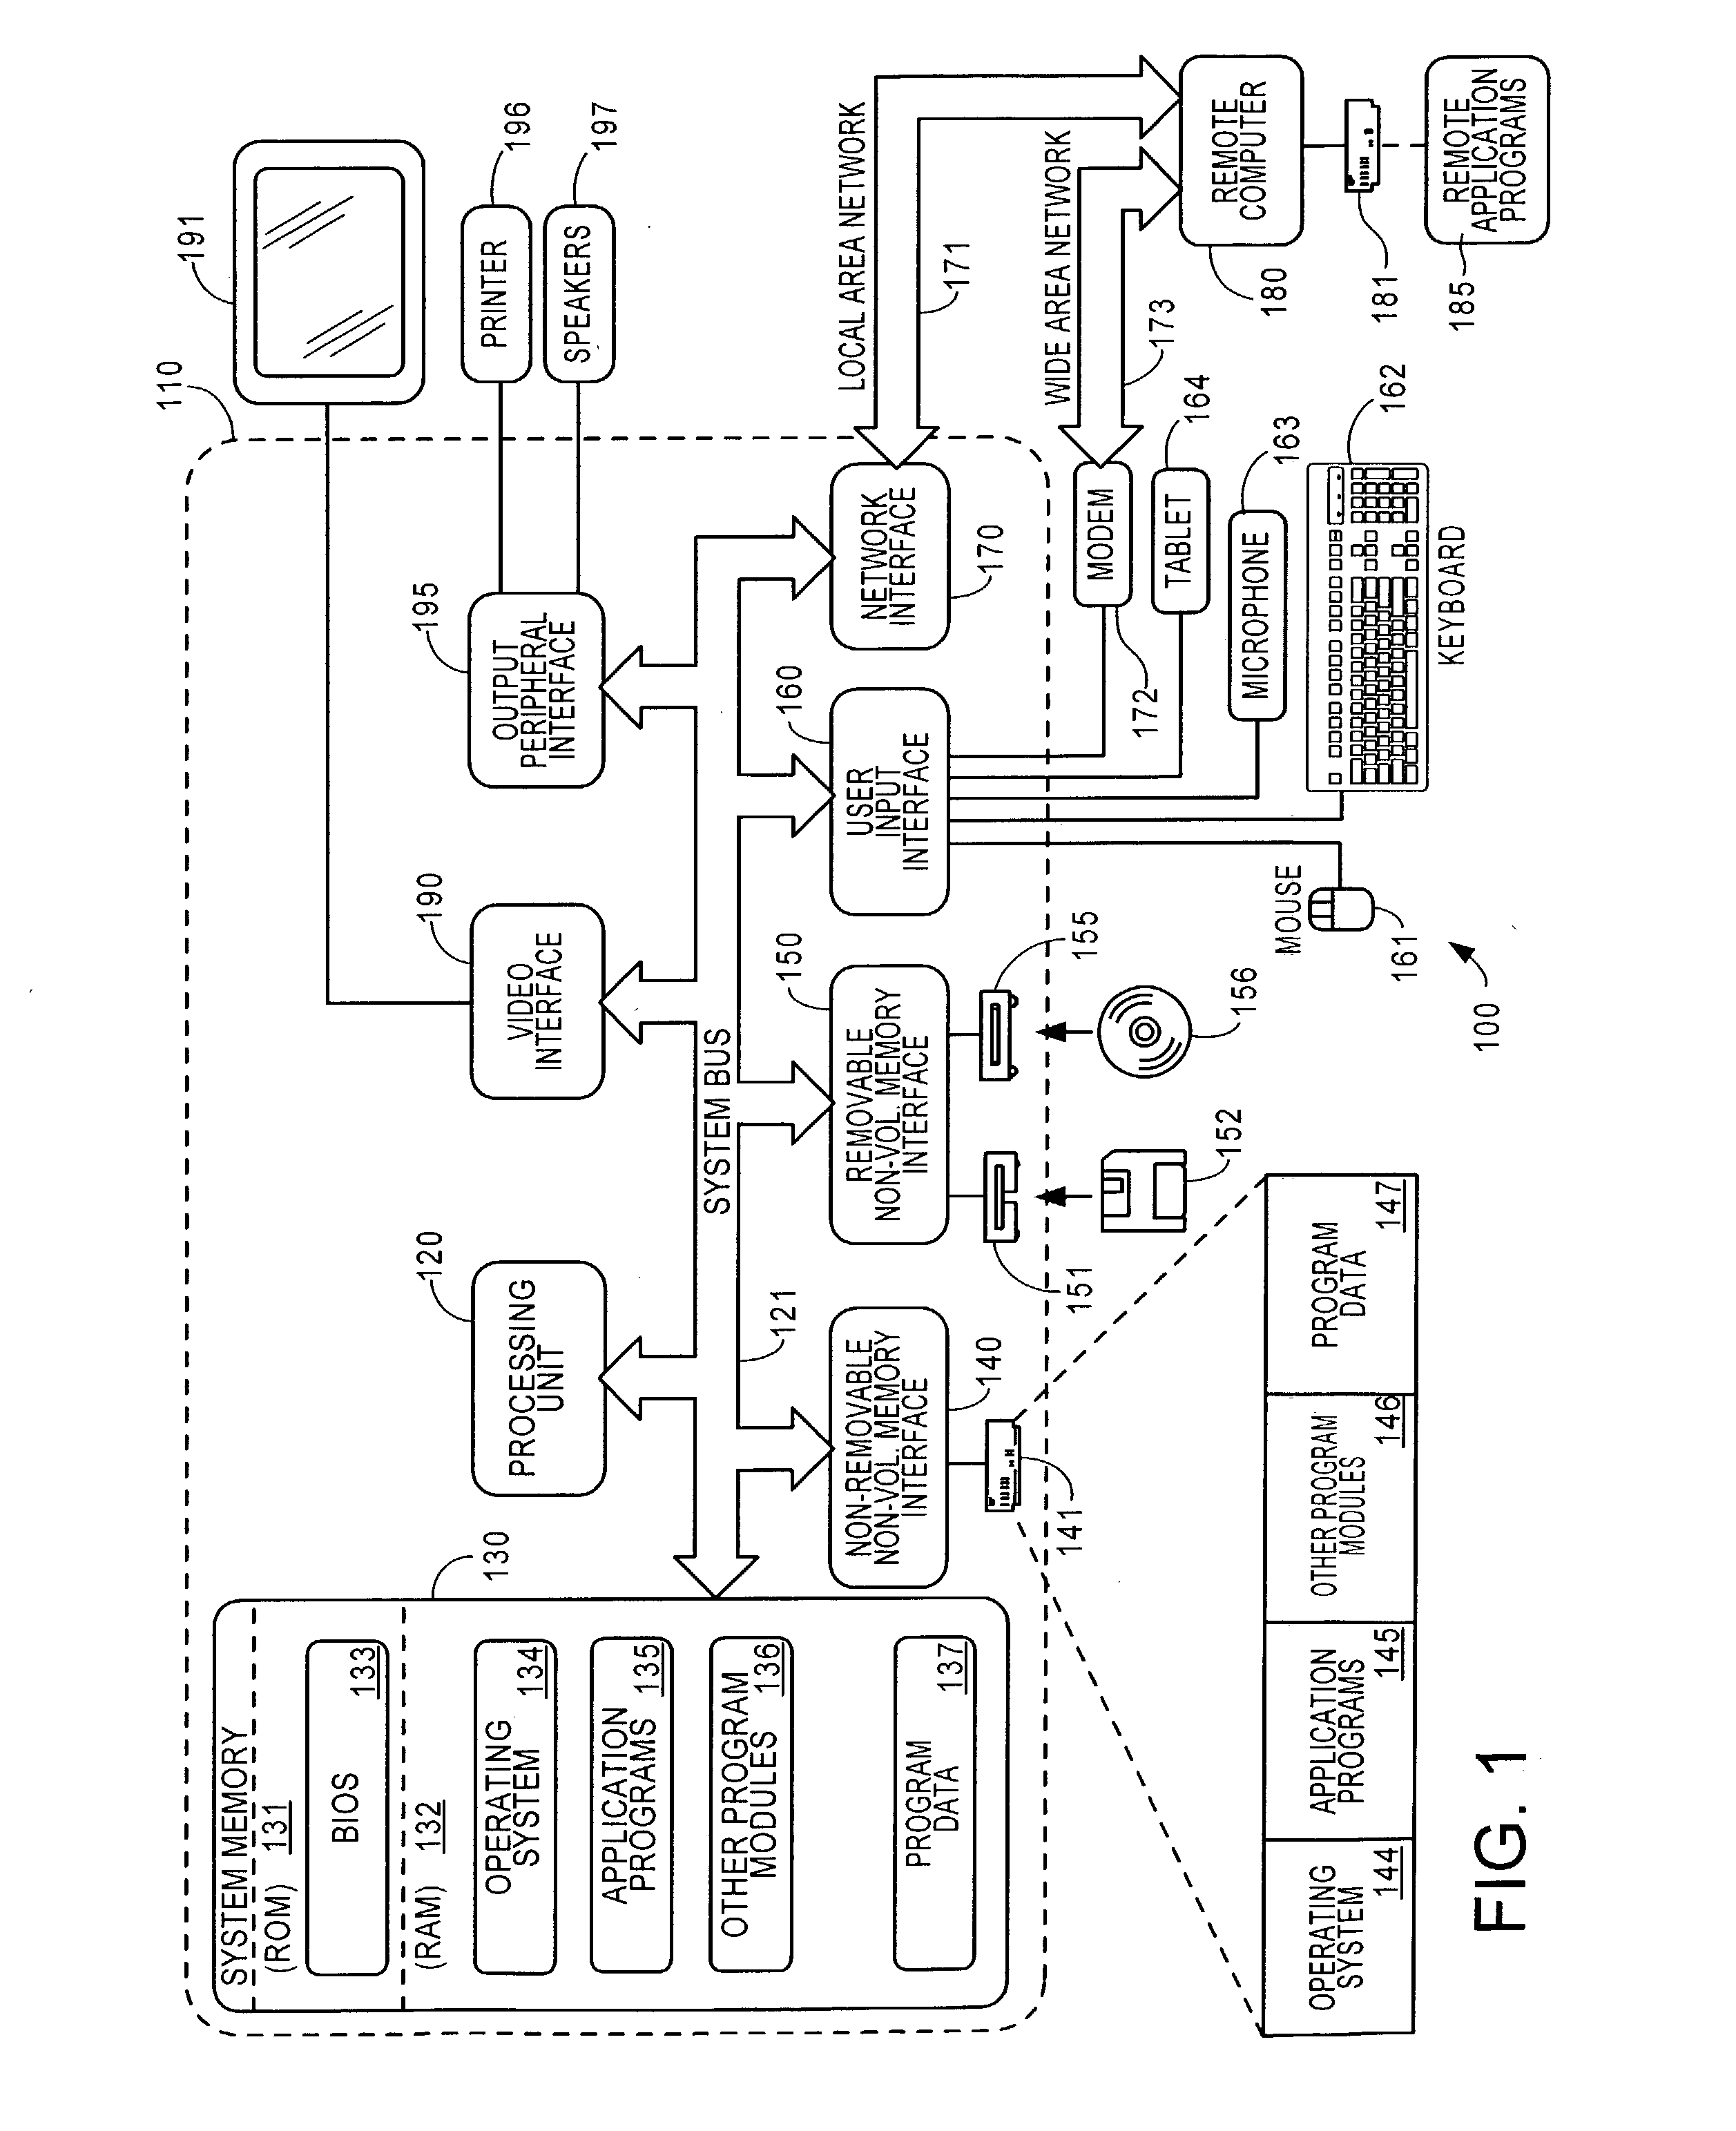 Method and framework for integrating a plurality of network policies